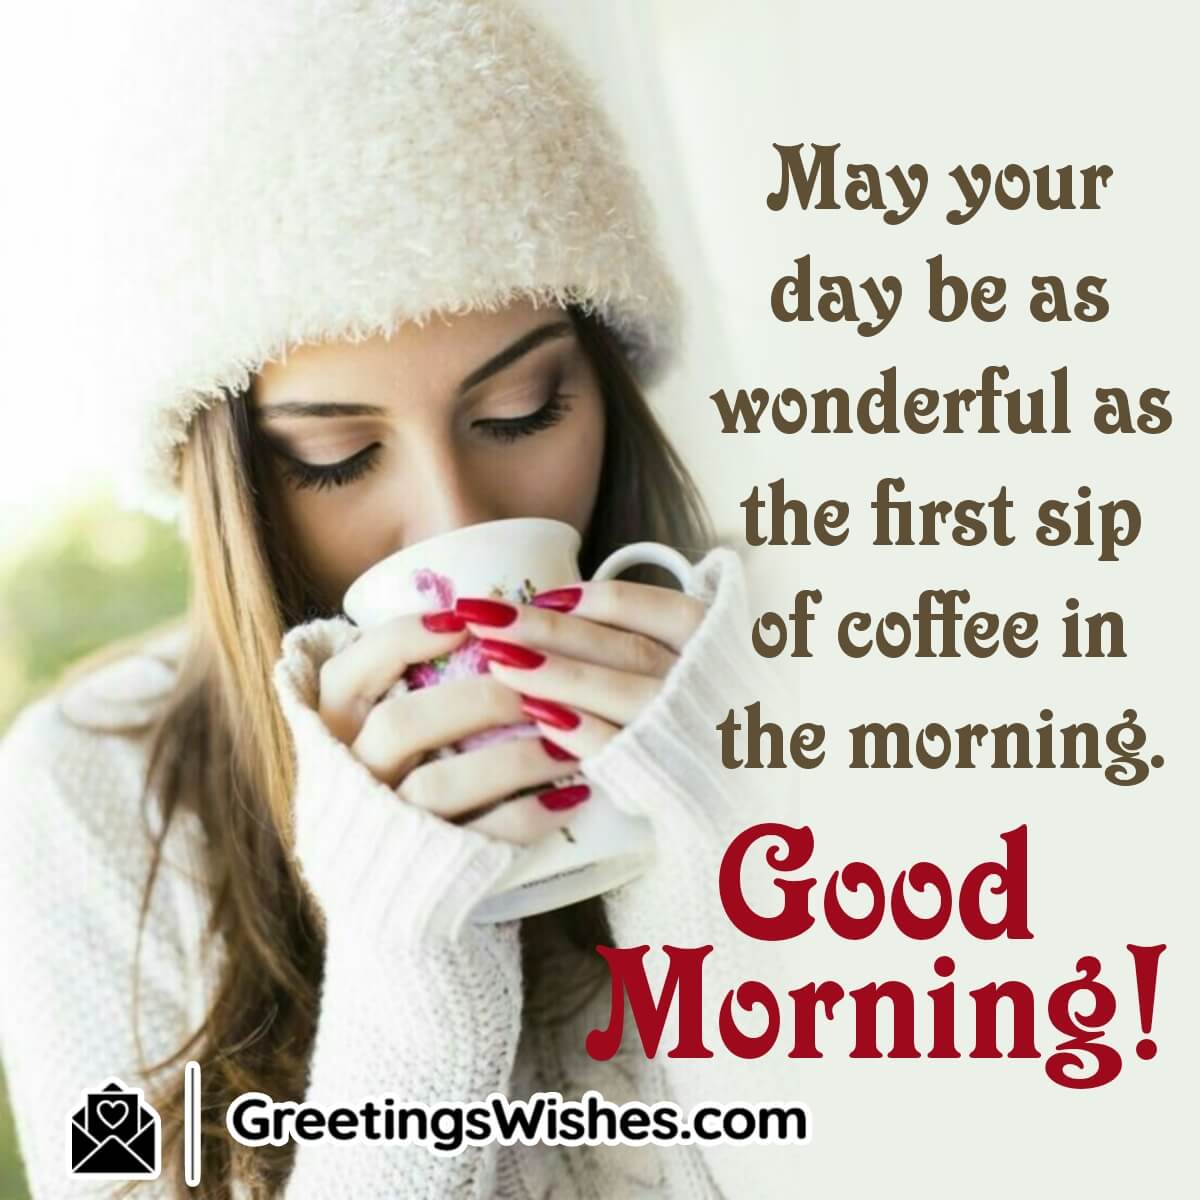 Awesome Good Morning Wishes - Greetings Wishes